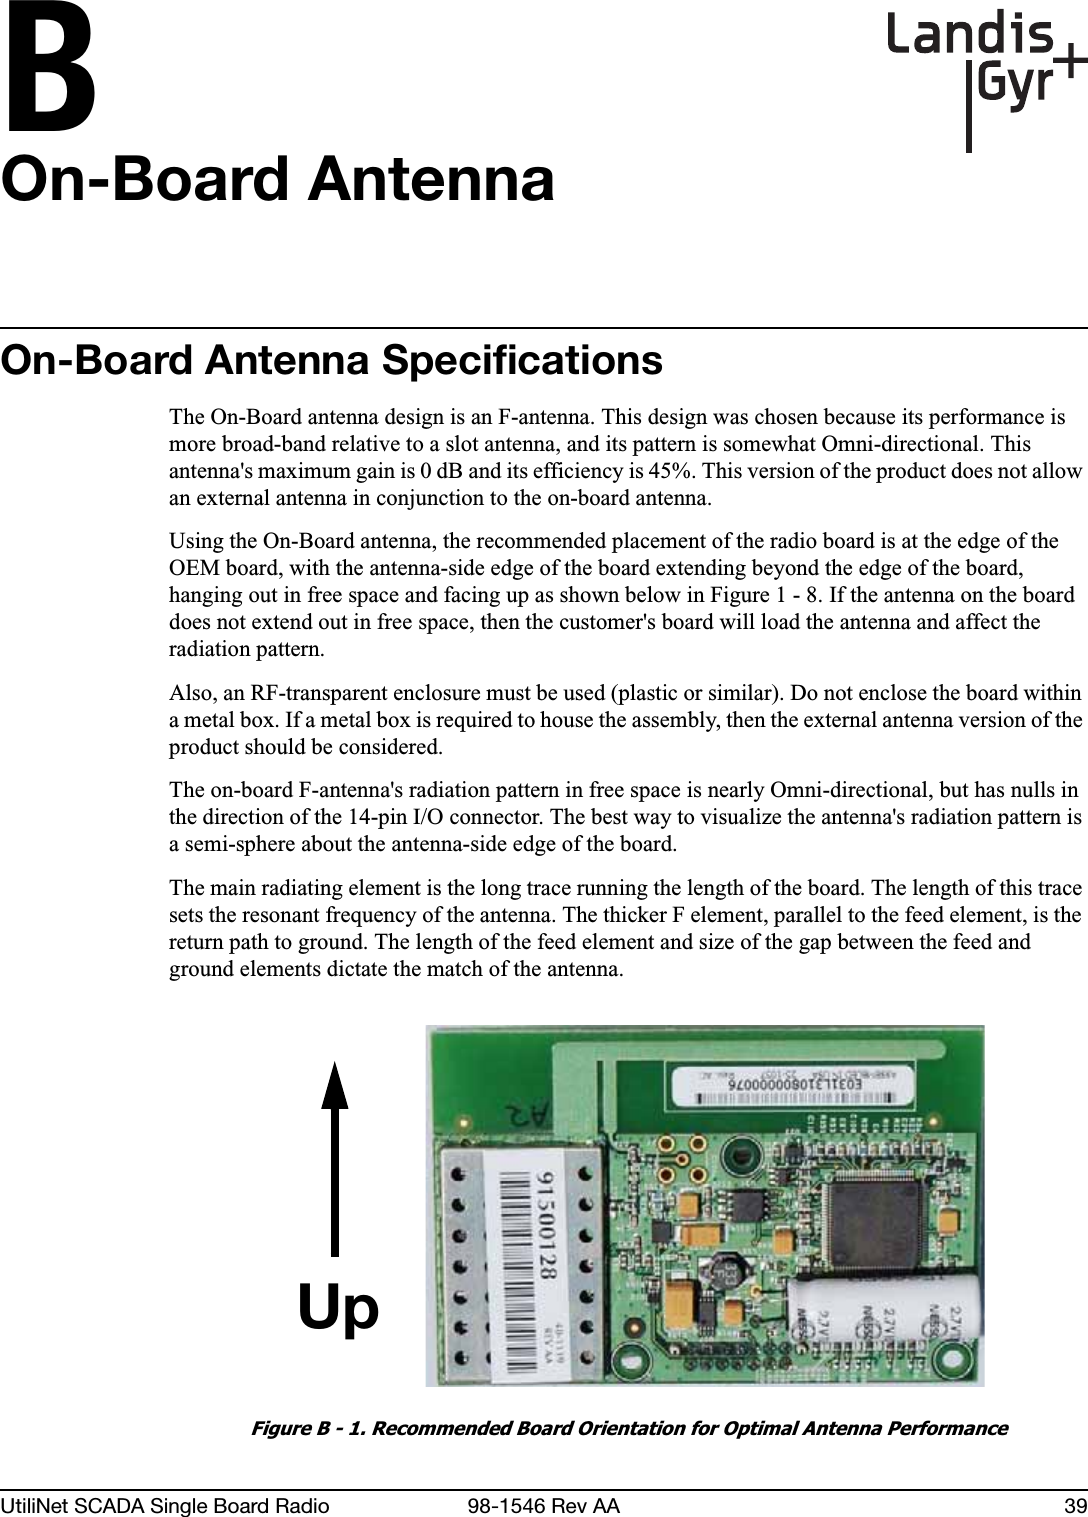 BUtiliNet SCADA Single Board Radio 98-1546 Rev AA 39On-Board AntennaOn-Board Antenna SpecificationsThe On-Board antenna design is an F-antenna. This design was chosen because its performance is more broad-band relative to a slot antenna, and its pattern is somewhat Omni-directional. This antenna&apos;s maximum gain is 0 dB and its efficiency is 45%. This version of the product does not allow an external antenna in conjunction to the on-board antenna.Using the On-Board antenna, the recommended placement of the radio board is at the edge of the OEM board, with the antenna-side edge of the board extending beyond the edge of the board, hanging out in free space and facing up as shown below in Figure 1 - 8. If the antenna on the board does not extend out in free space, then the customer&apos;s board will load the antenna and affect the radiation pattern.Also, an RF-transparent enclosure must be used (plastic or similar). Do not enclose the board within a metal box. If a metal box is required to house the assembly, then the external antenna version of the product should be considered.The on-board F-antenna&apos;s radiation pattern in free space is nearly Omni-directional, but has nulls in the direction of the 14-pin I/O connector. The best way to visualize the antenna&apos;s radiation pattern is a semi-sphere about the antenna-side edge of the board.The main radiating element is the long trace running the length of the board. The length of this trace sets the resonant frequency of the antenna. The thicker F element, parallel to the feed element, is the return path to ground. The length of the feed element and size of the gap between the feed and ground elements dictate the match of the antenna.Figure B - 1. Recommended Board Orientation for Optimal Antenna PerformanceUp